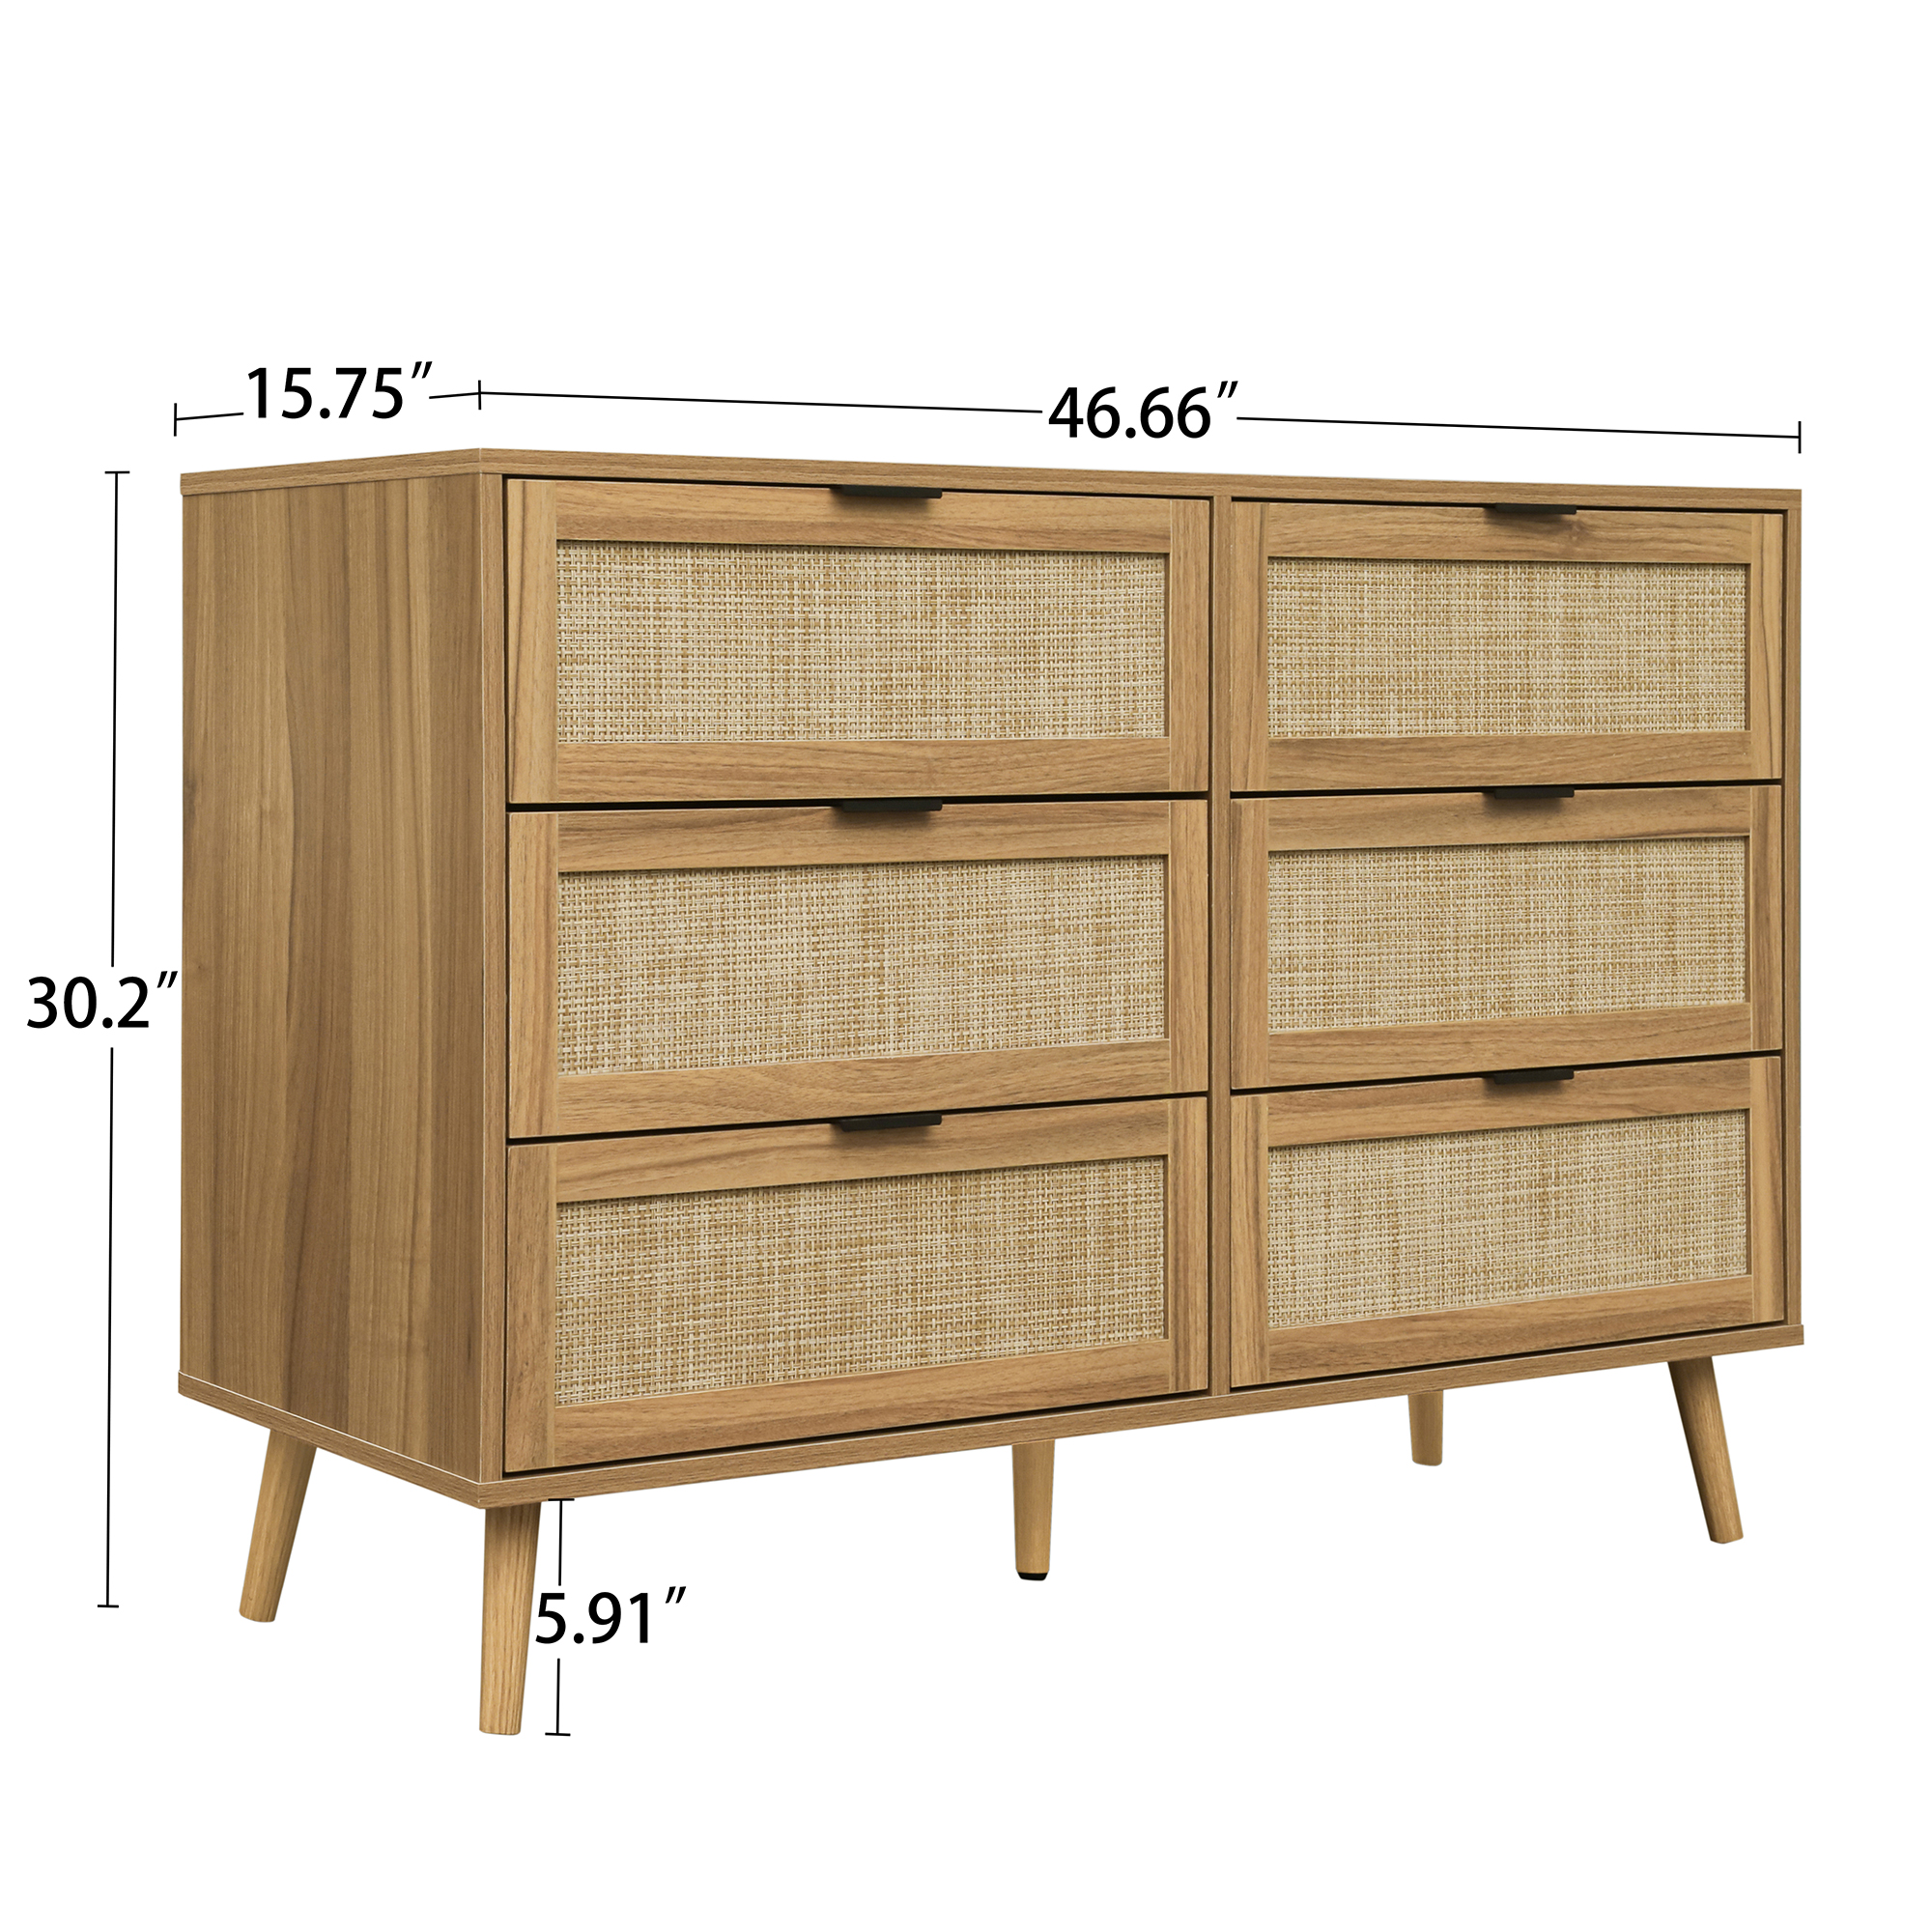 Resenkos Modern Rattan Dressers for Bedroom, 6 Drawer Dresser Organizer with Black Handles, Accent Chest of Drawer - image 3 of 18